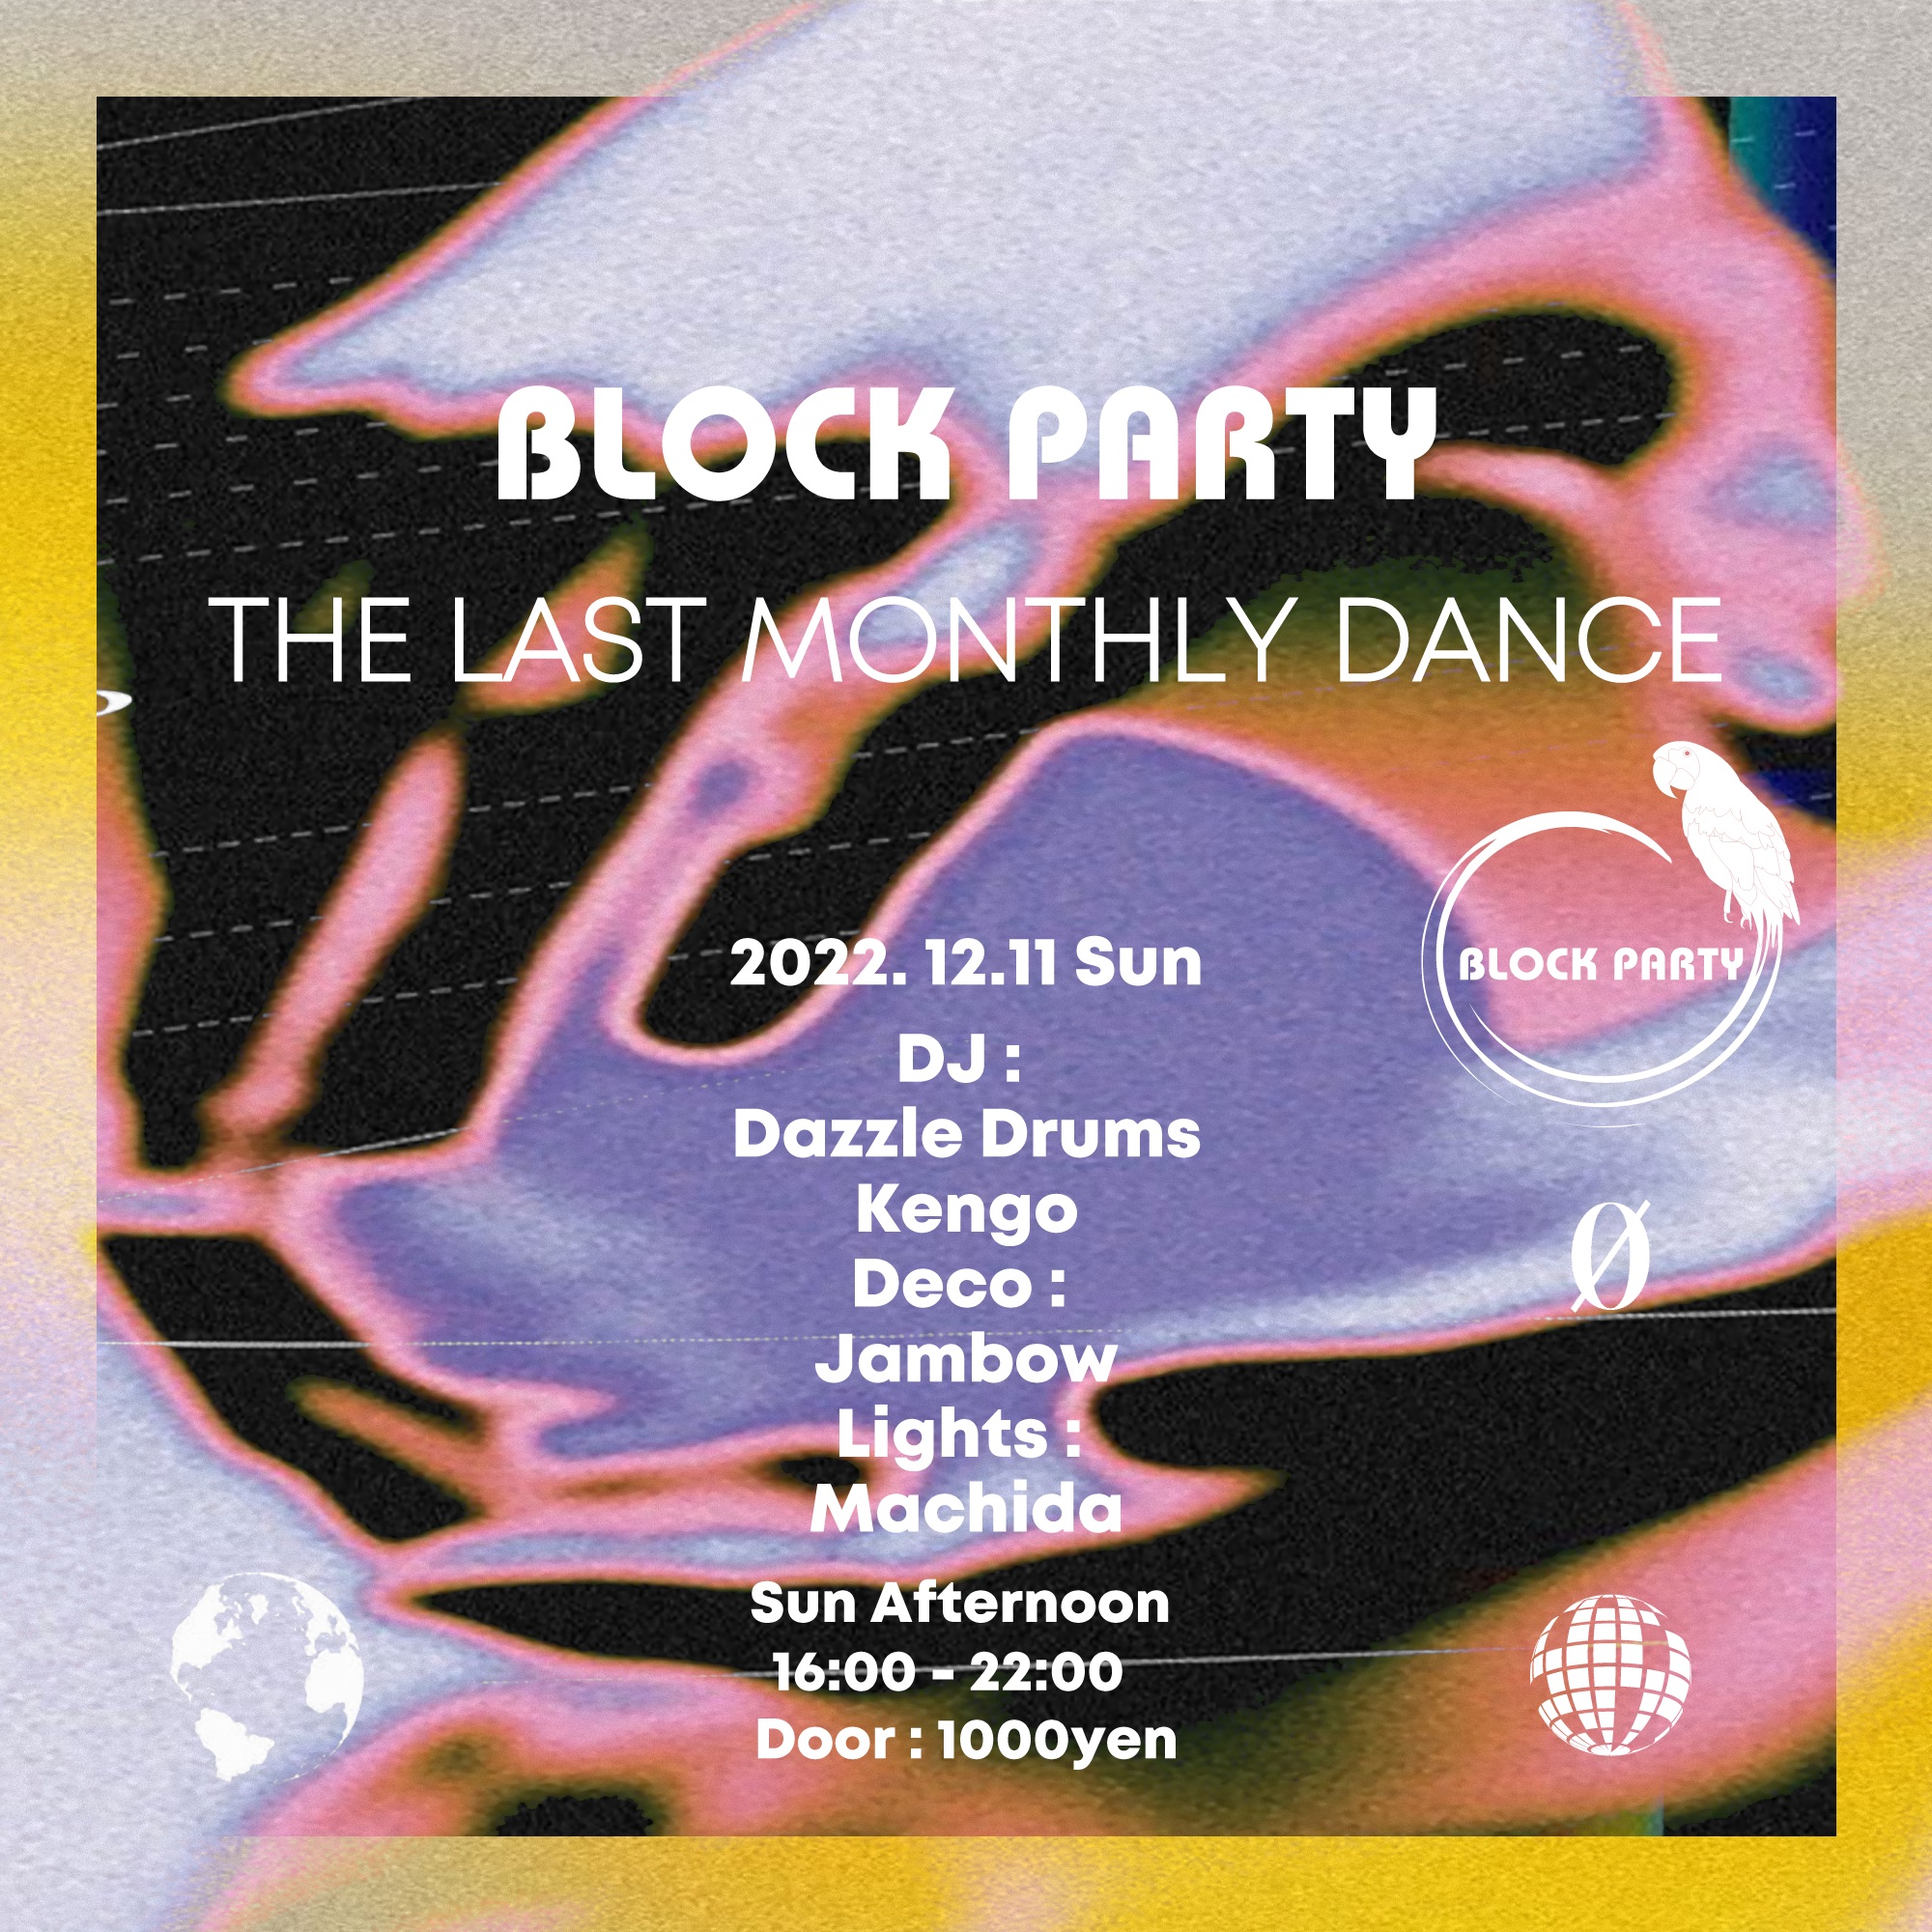 12.11.22 (Sun Afternoon) Block Party “The Last Monthly Dance” @ 0 Zero